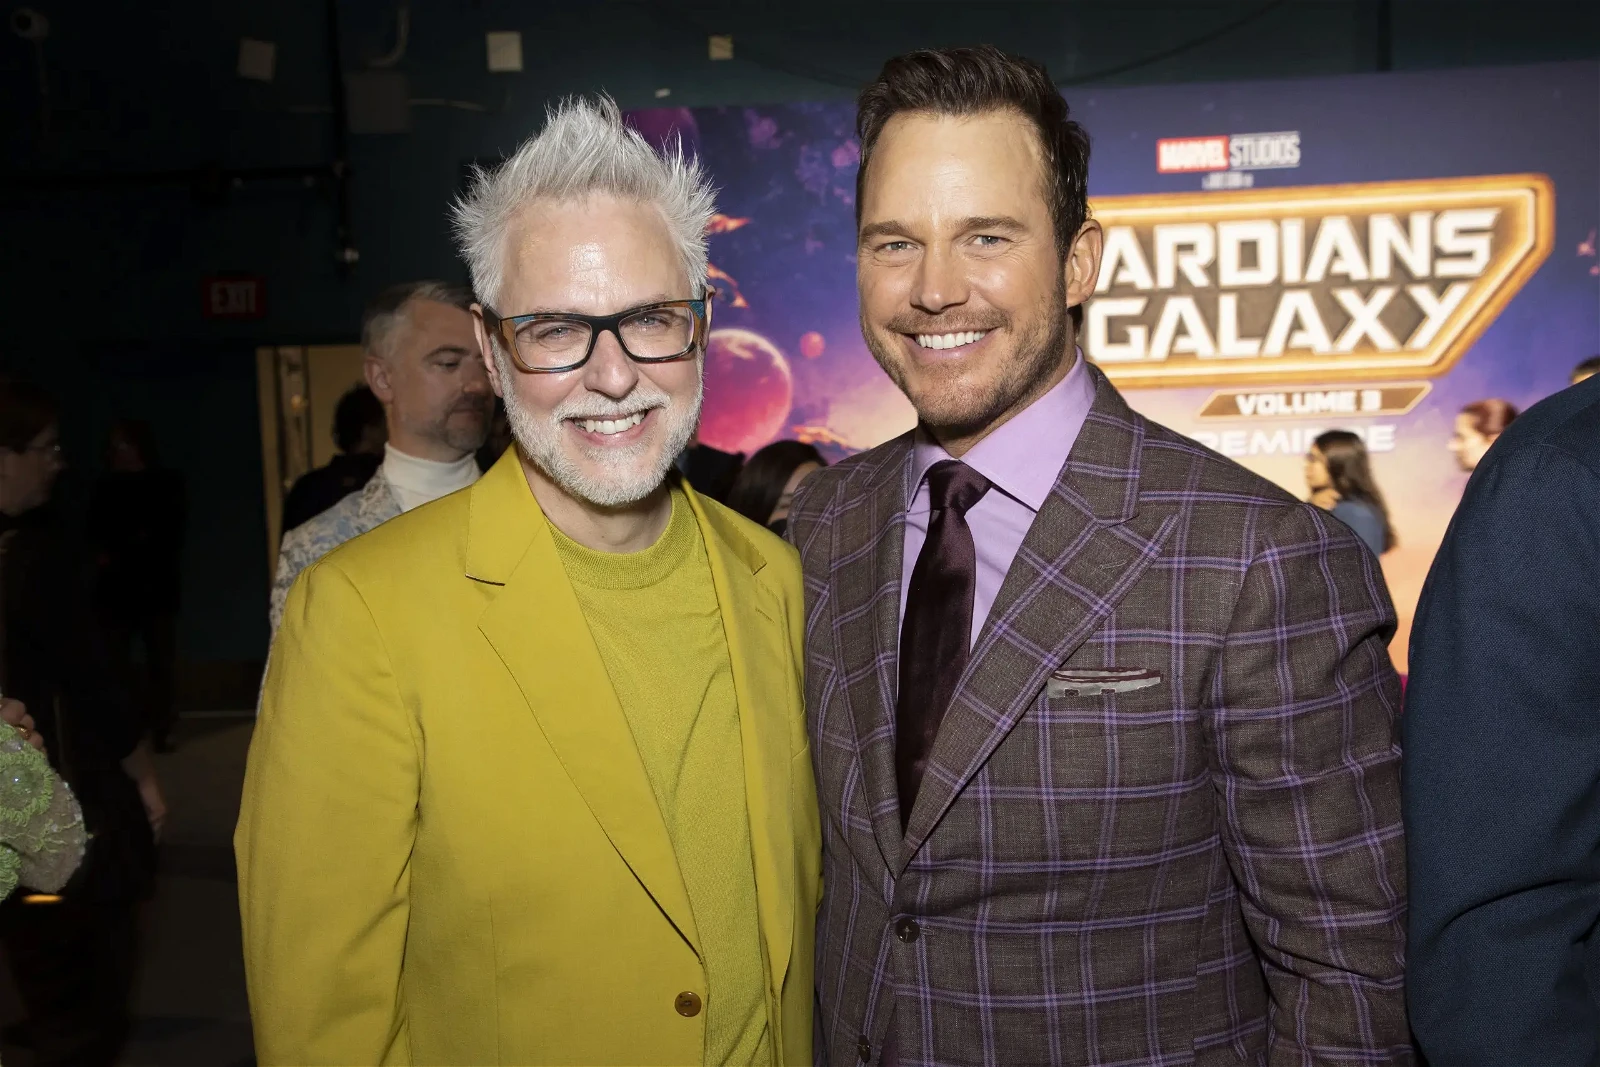 James Gunn and Chris Pratt at the premiere of Guardians of the Galaxy